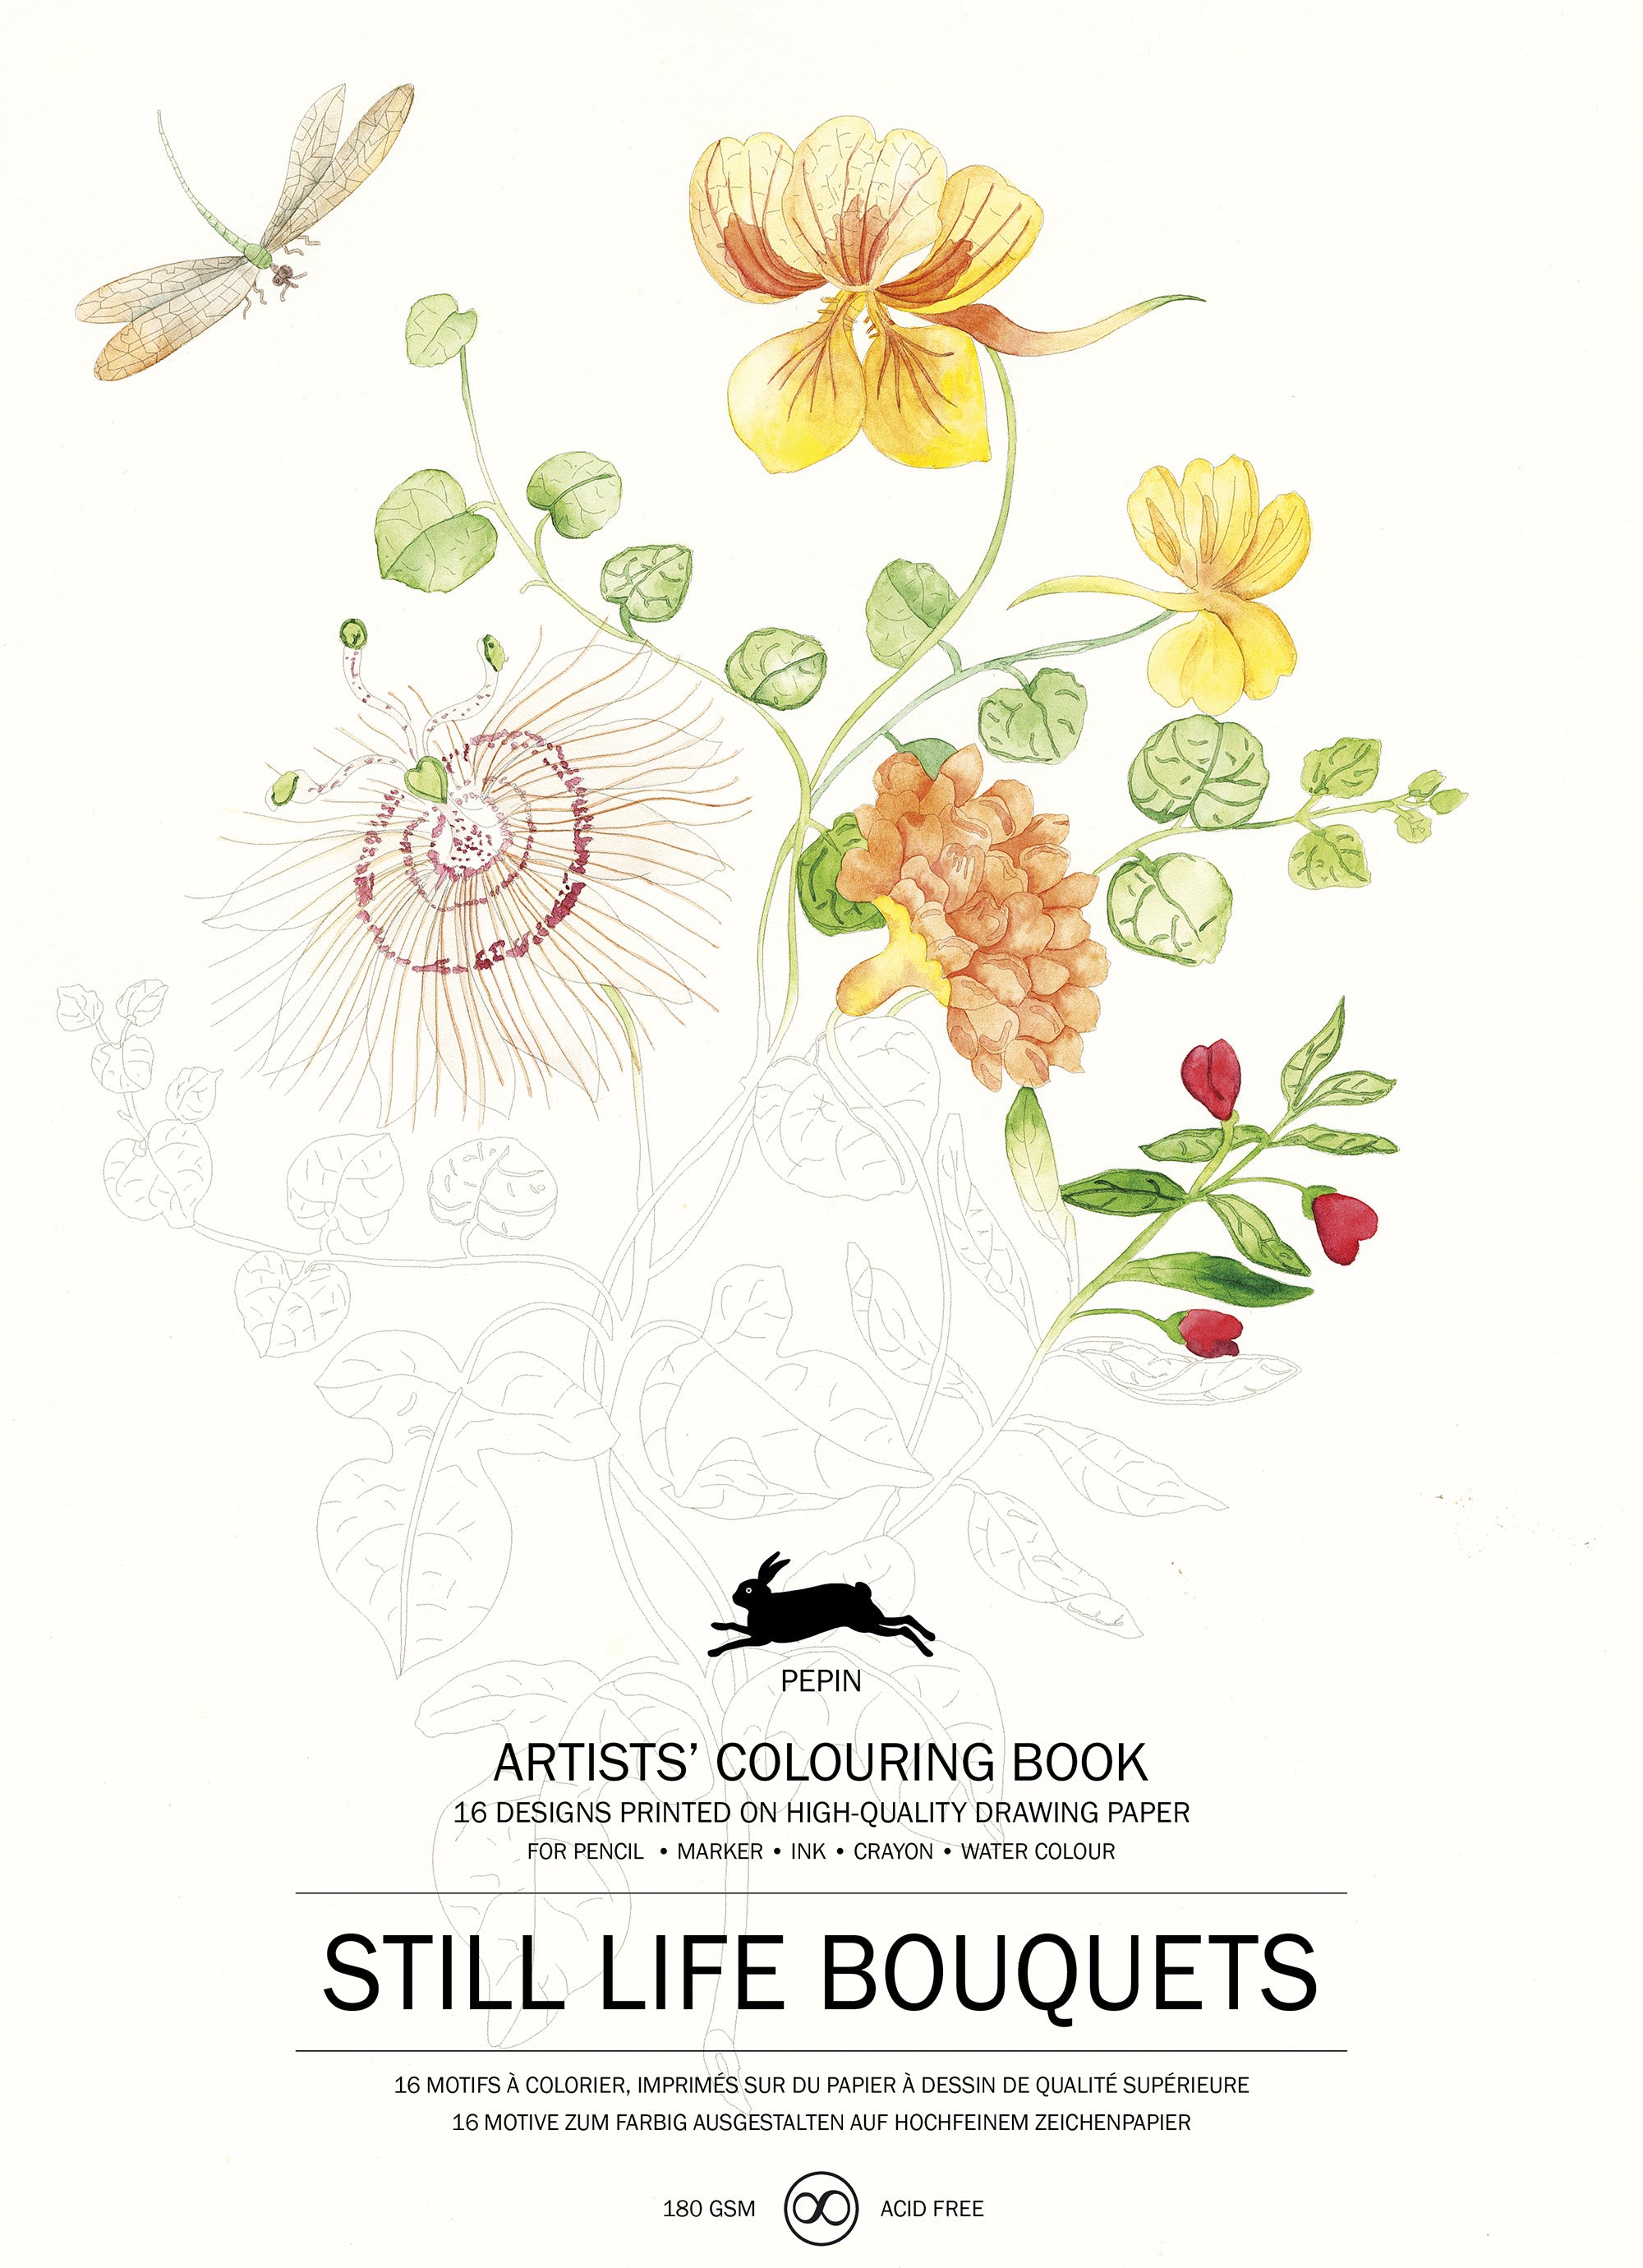 Artists' Coloring Book - Still Life Bouquets